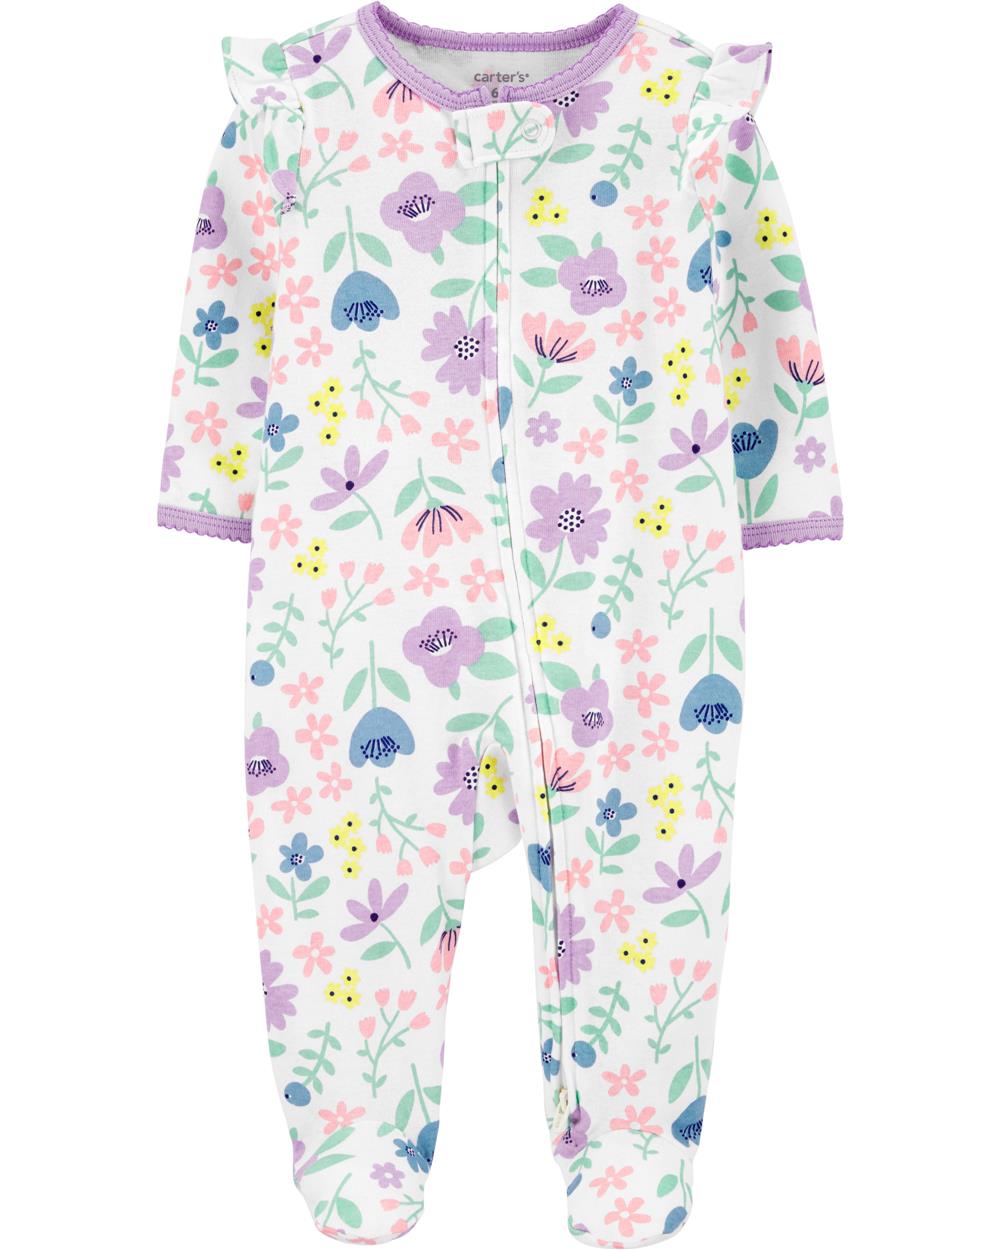 Carters Girls 0-9 Months Floral Sleep and Play